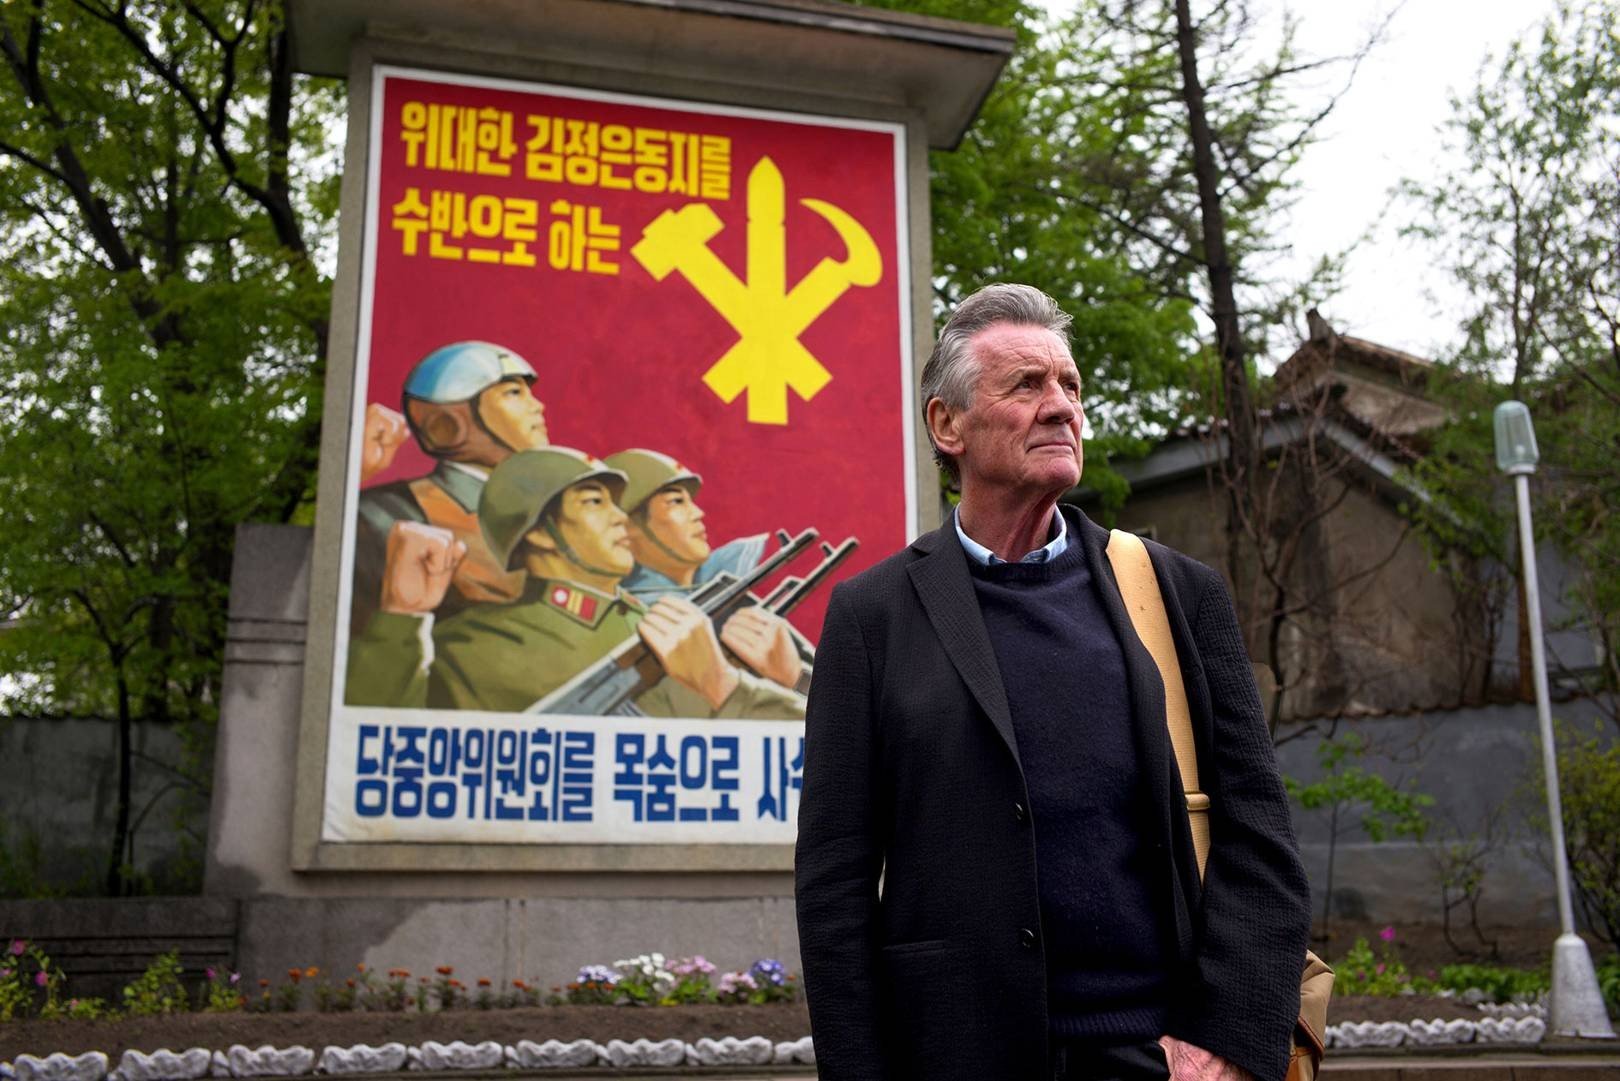 In Michael Palin’s latest travelogue, North Korea Journal, the former Monty Python star takes a trip to the world’s most secretive country.